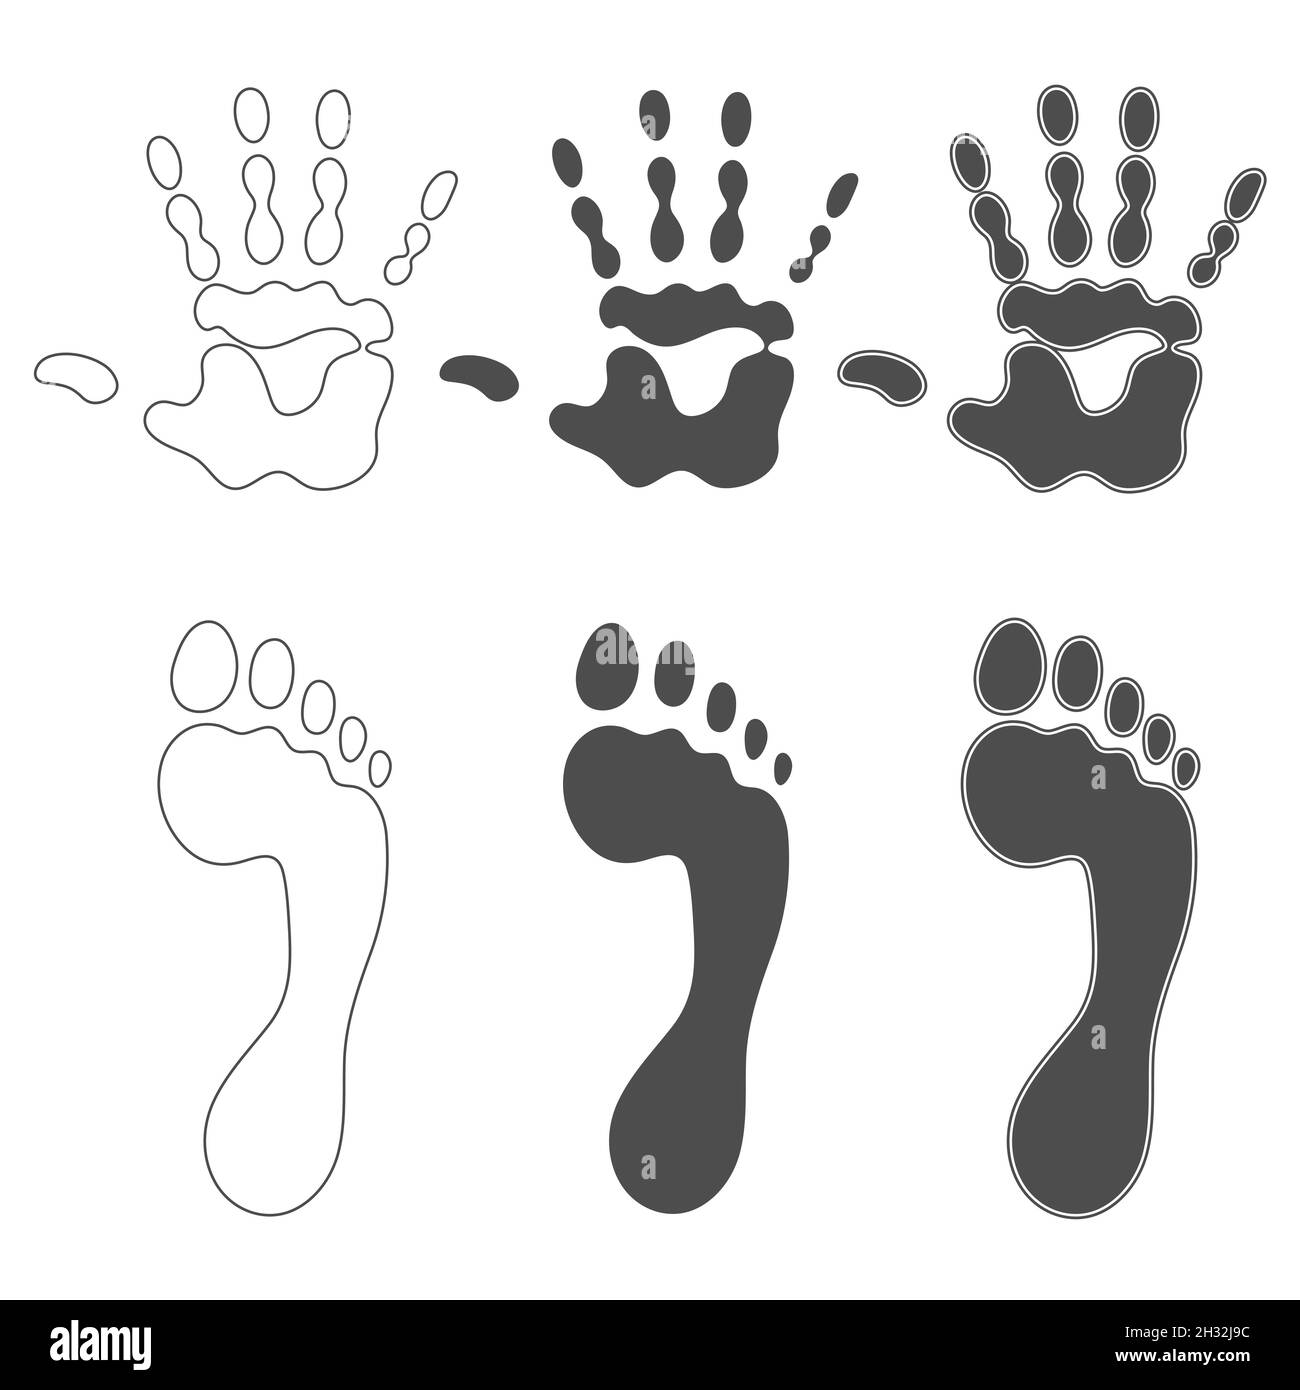 Set of black and white illustrations with prints of hands and feet. Isolated vector objects on white background. Stock Vector